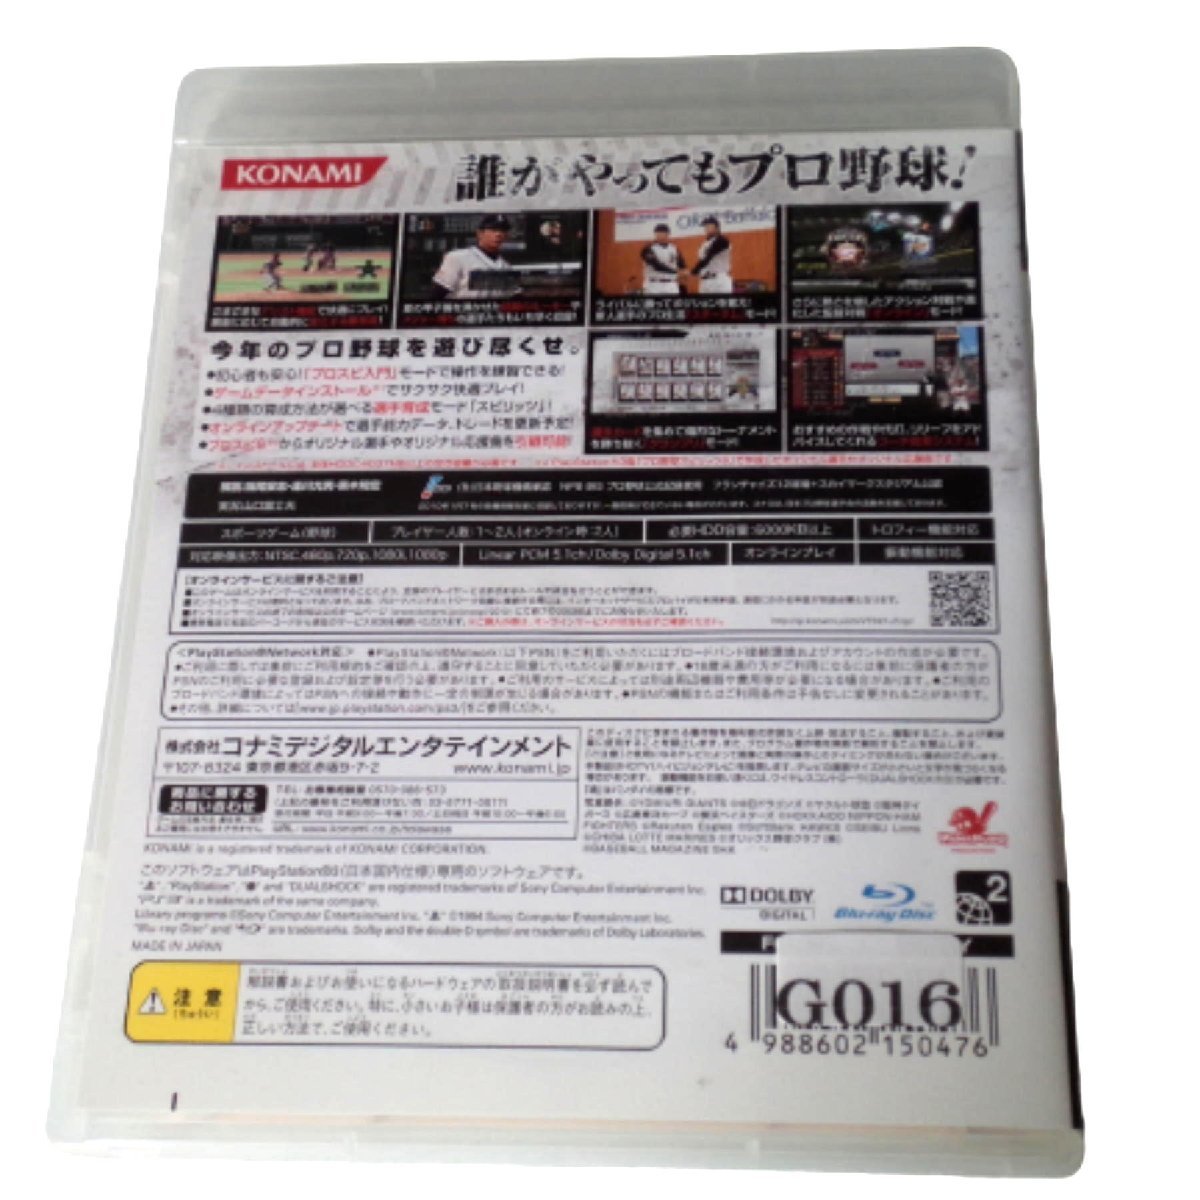 *PS3 soft * PlayStation 3* start-up only verification settled * Professional Baseball Spirits 2010 / PS3 for soft ( package version ) image . overall *G016